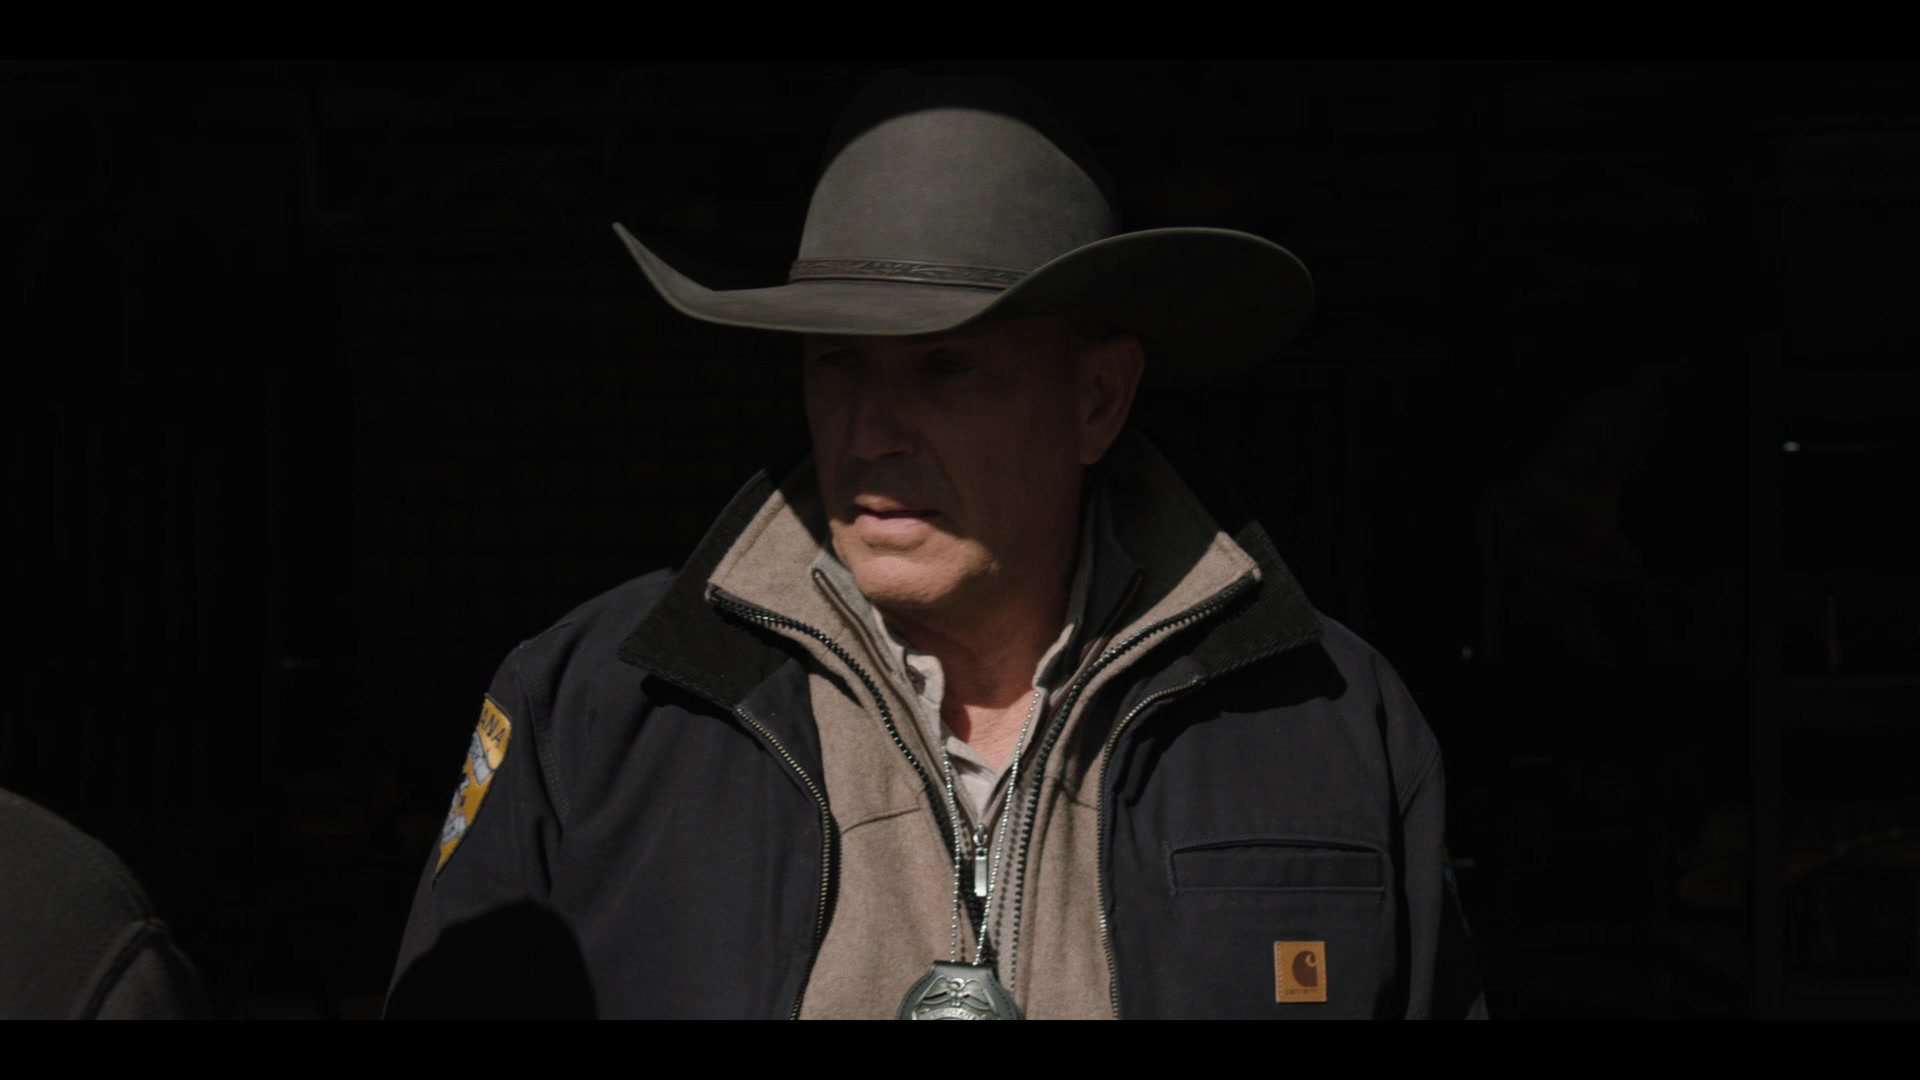 Carhartt Jacket Worn by Kevin Costner in Yellowstone